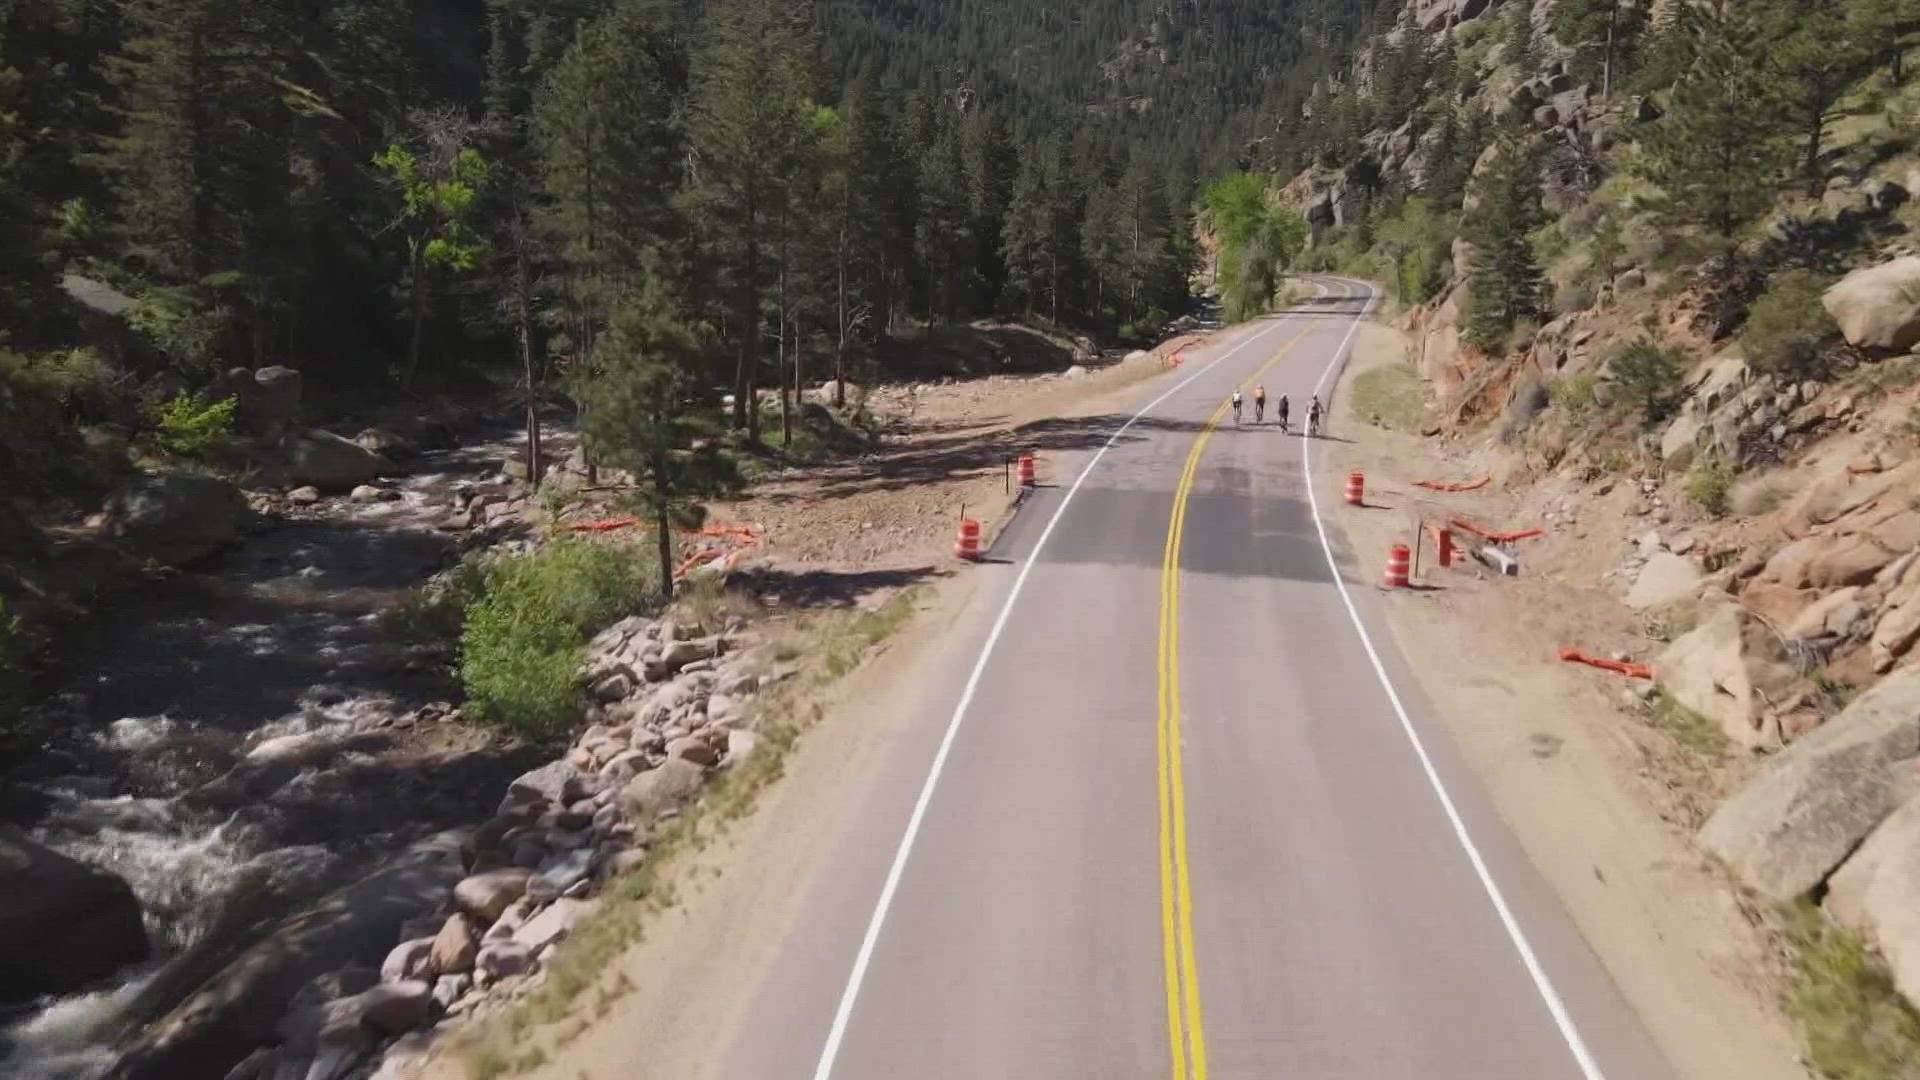 CDOT had a celebration on HWY 7 in Lyons. Nine years after the floods damaged the roads, repairs are almost complete. Photojournalist Tom Cole got a sneak preview.